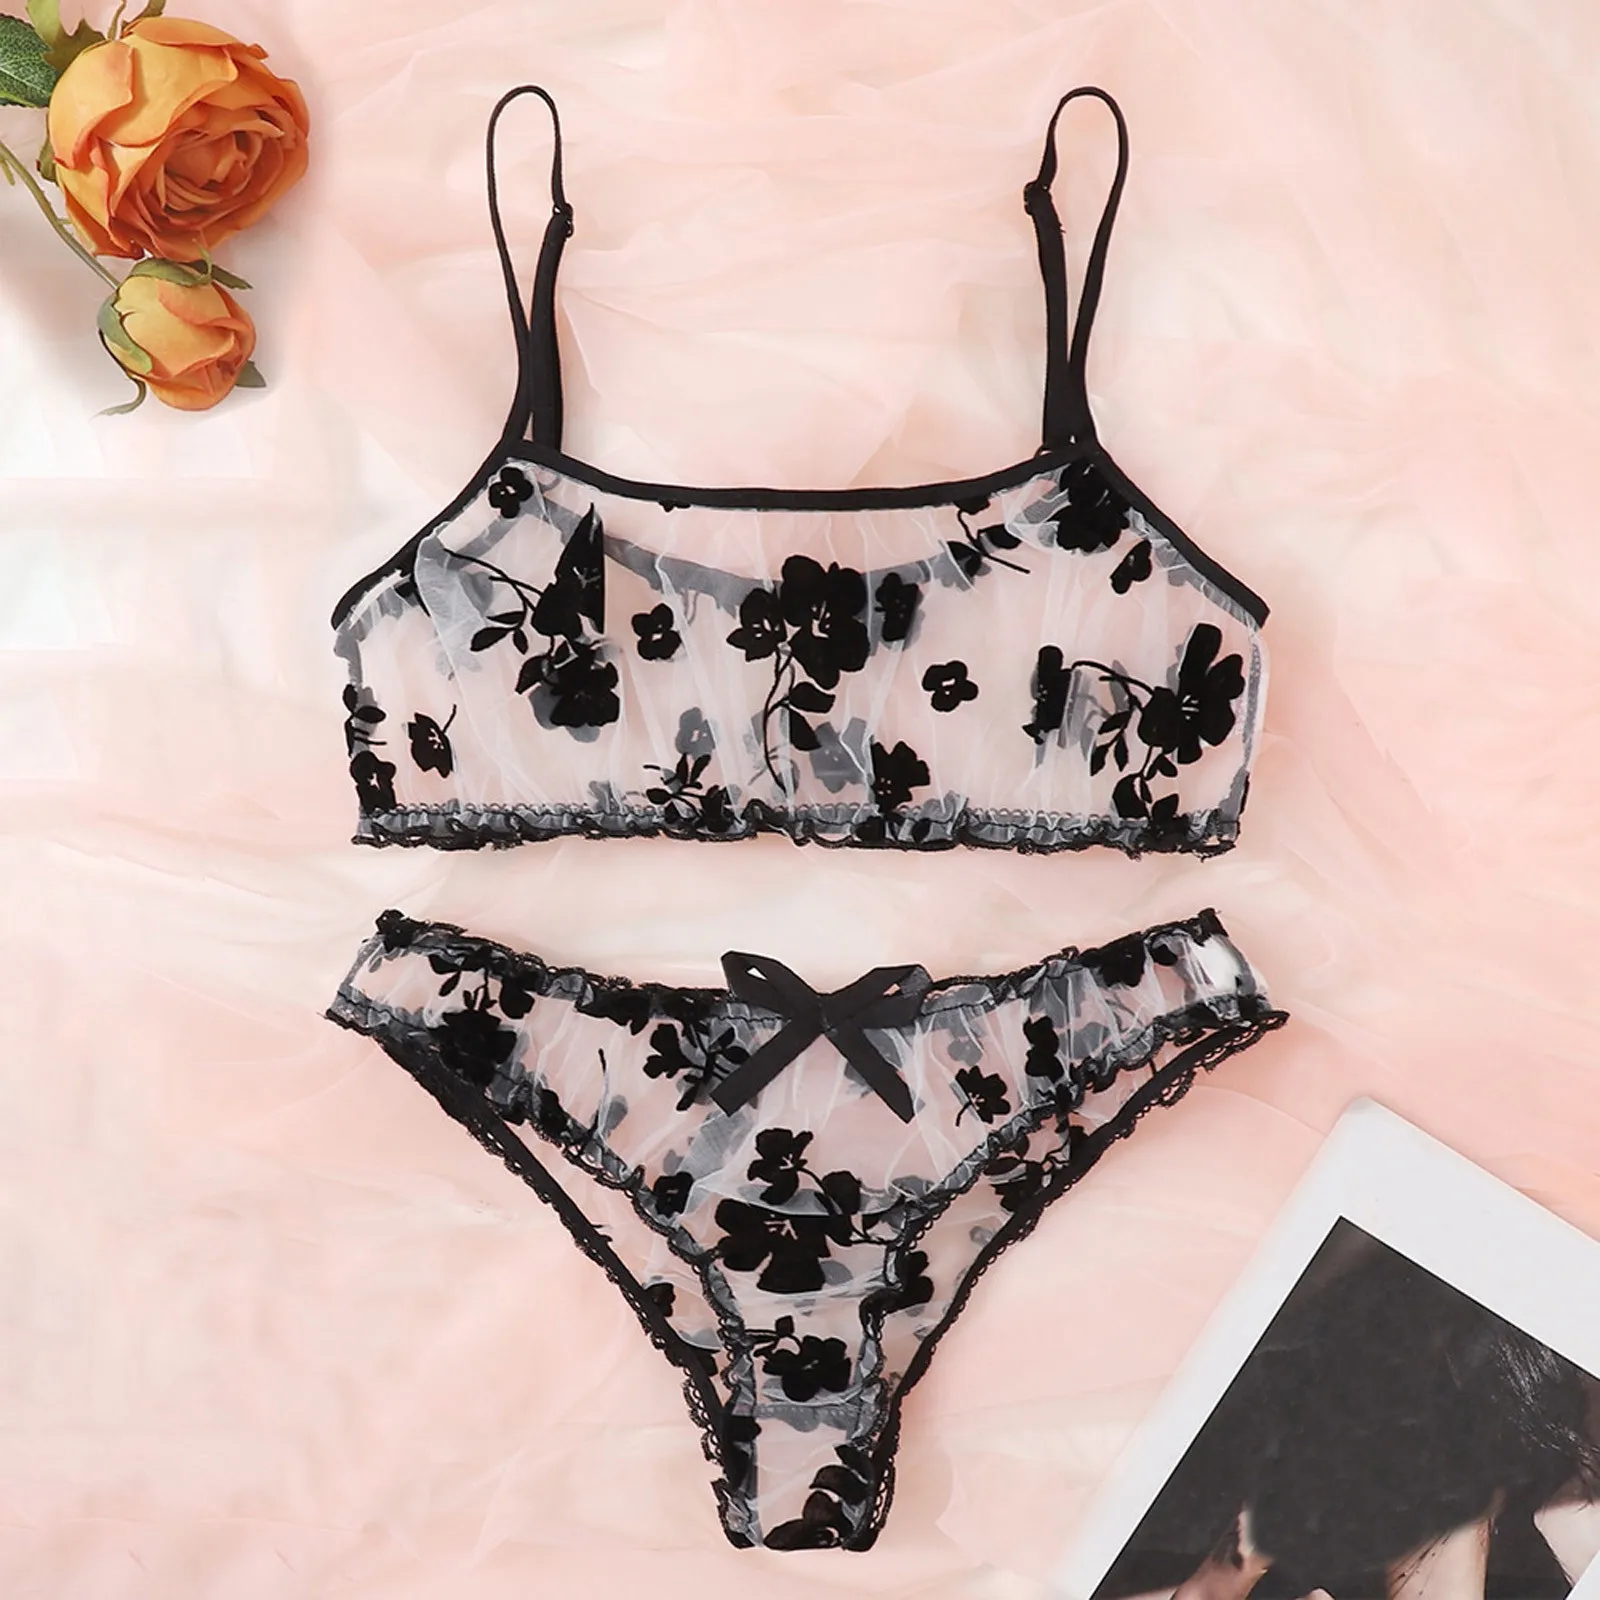 bralette sets 25# Erotic Sexy Lingerie Sets Women Sensual Underwear Push Up Bra With Lace Transparent Seamless Intimate Flower Embroidery bra and panty